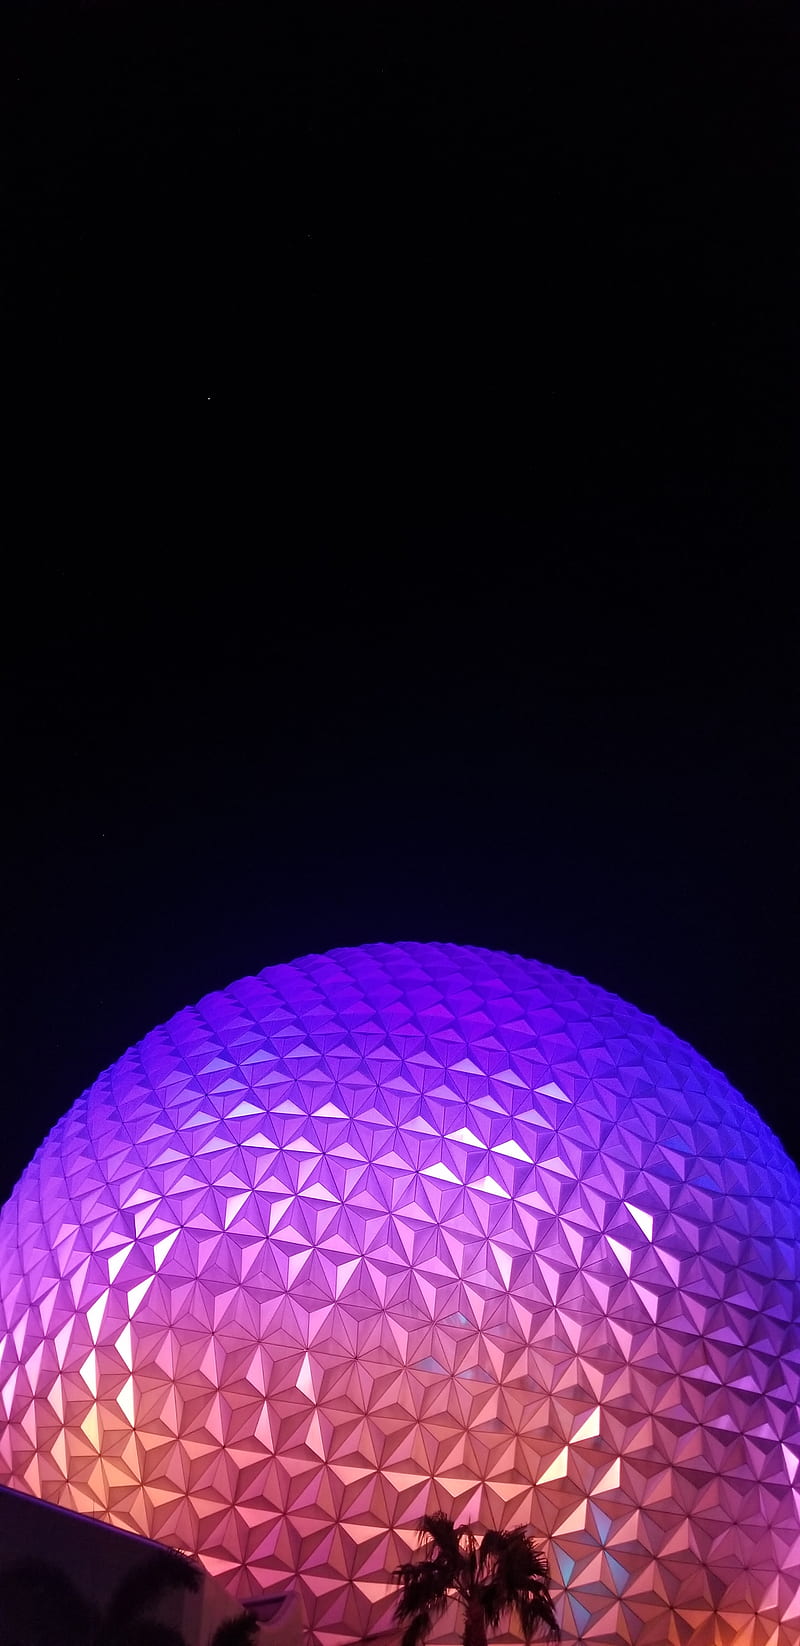 Phil  The Horizoneer on X Added some color variations to this EPCOT  wallpaper I made a while ago  feel free to use if interested  httpstcormXhR8CfXp  X